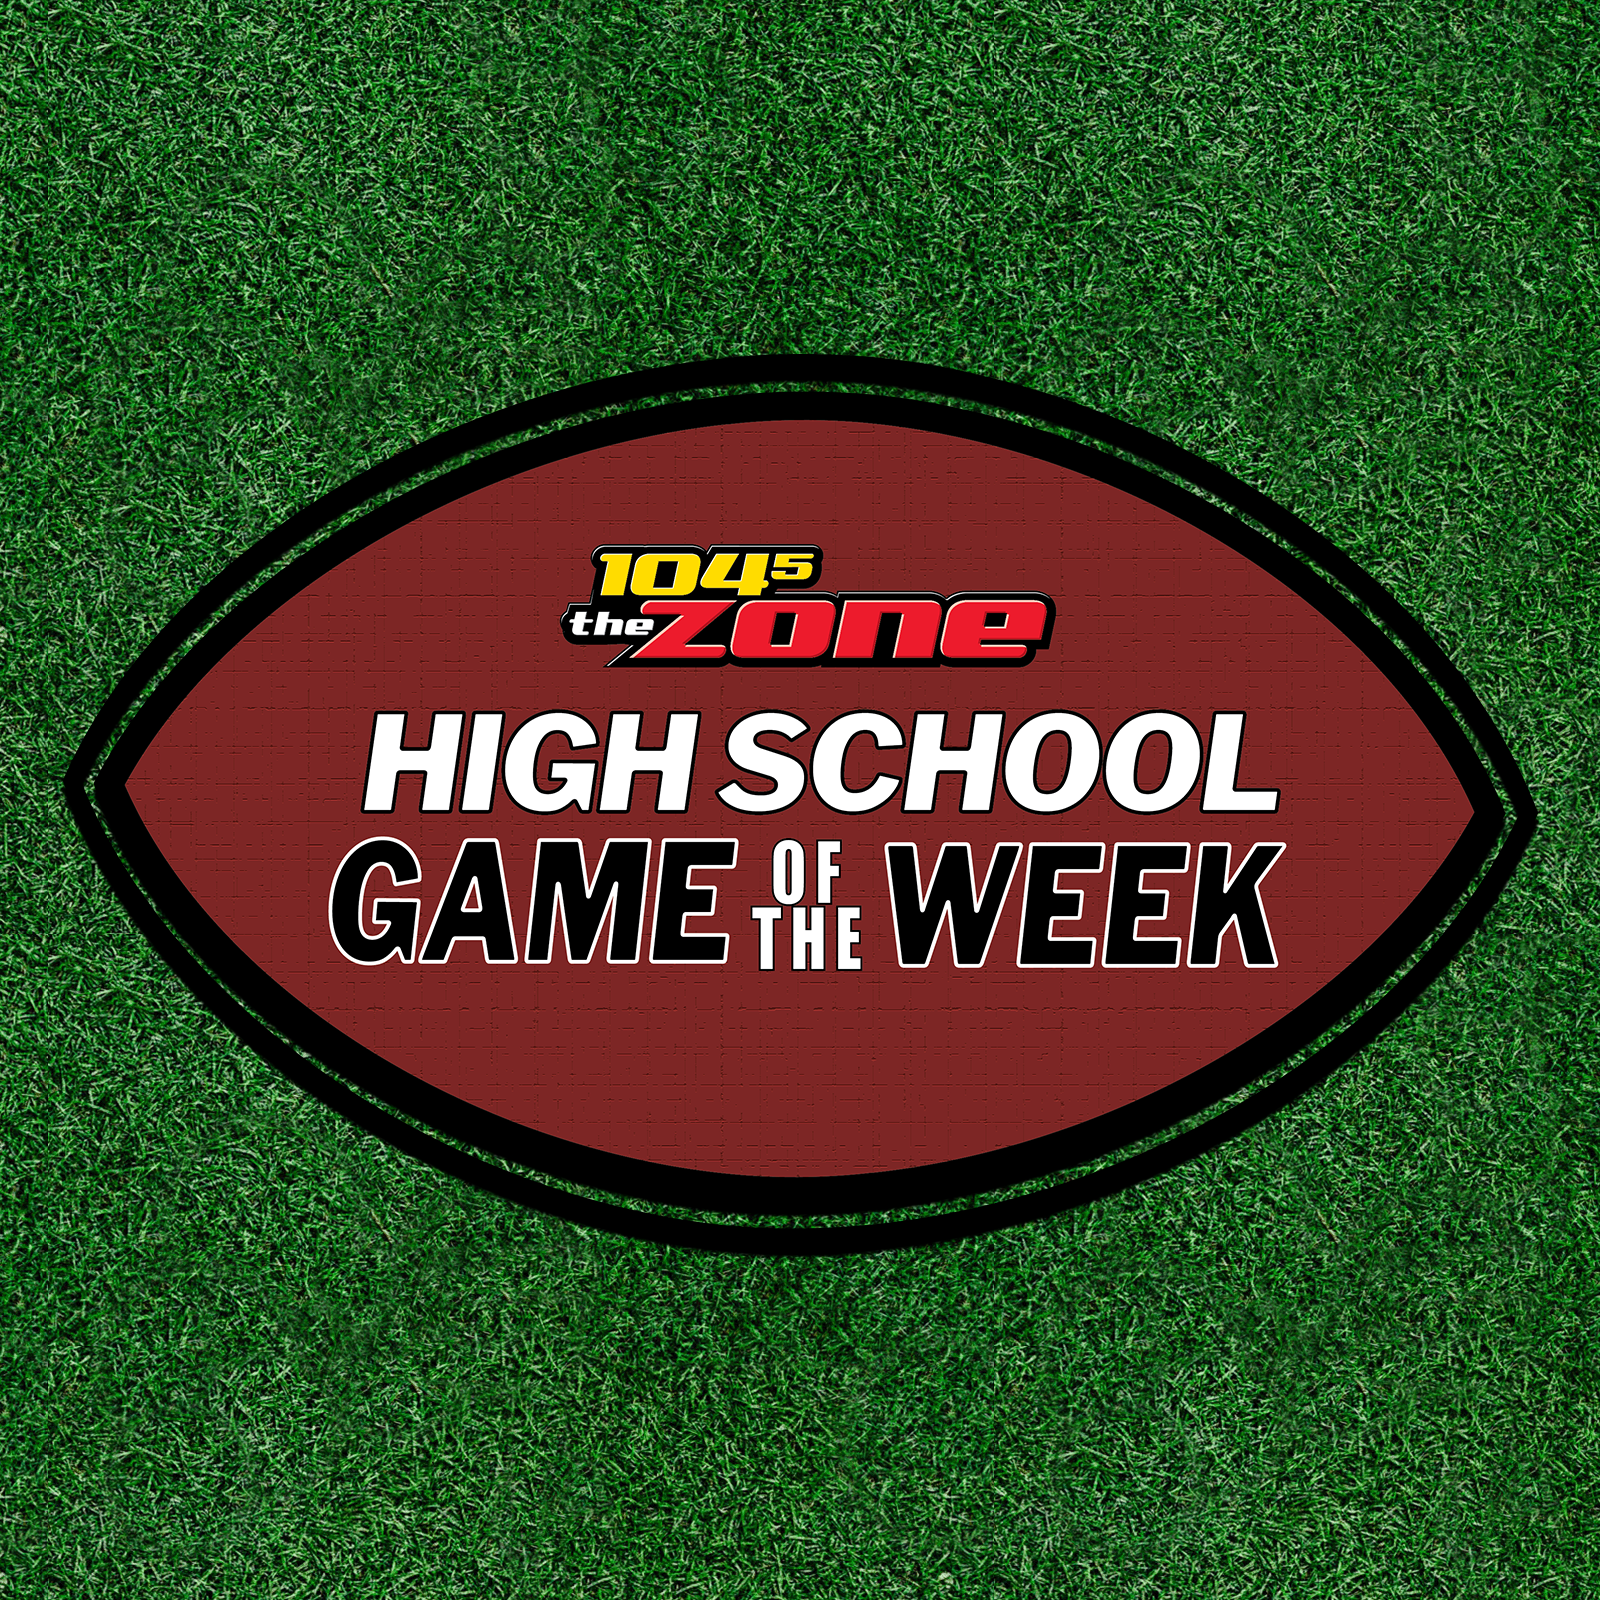 The 104-5 The Zone High School Football Podcast